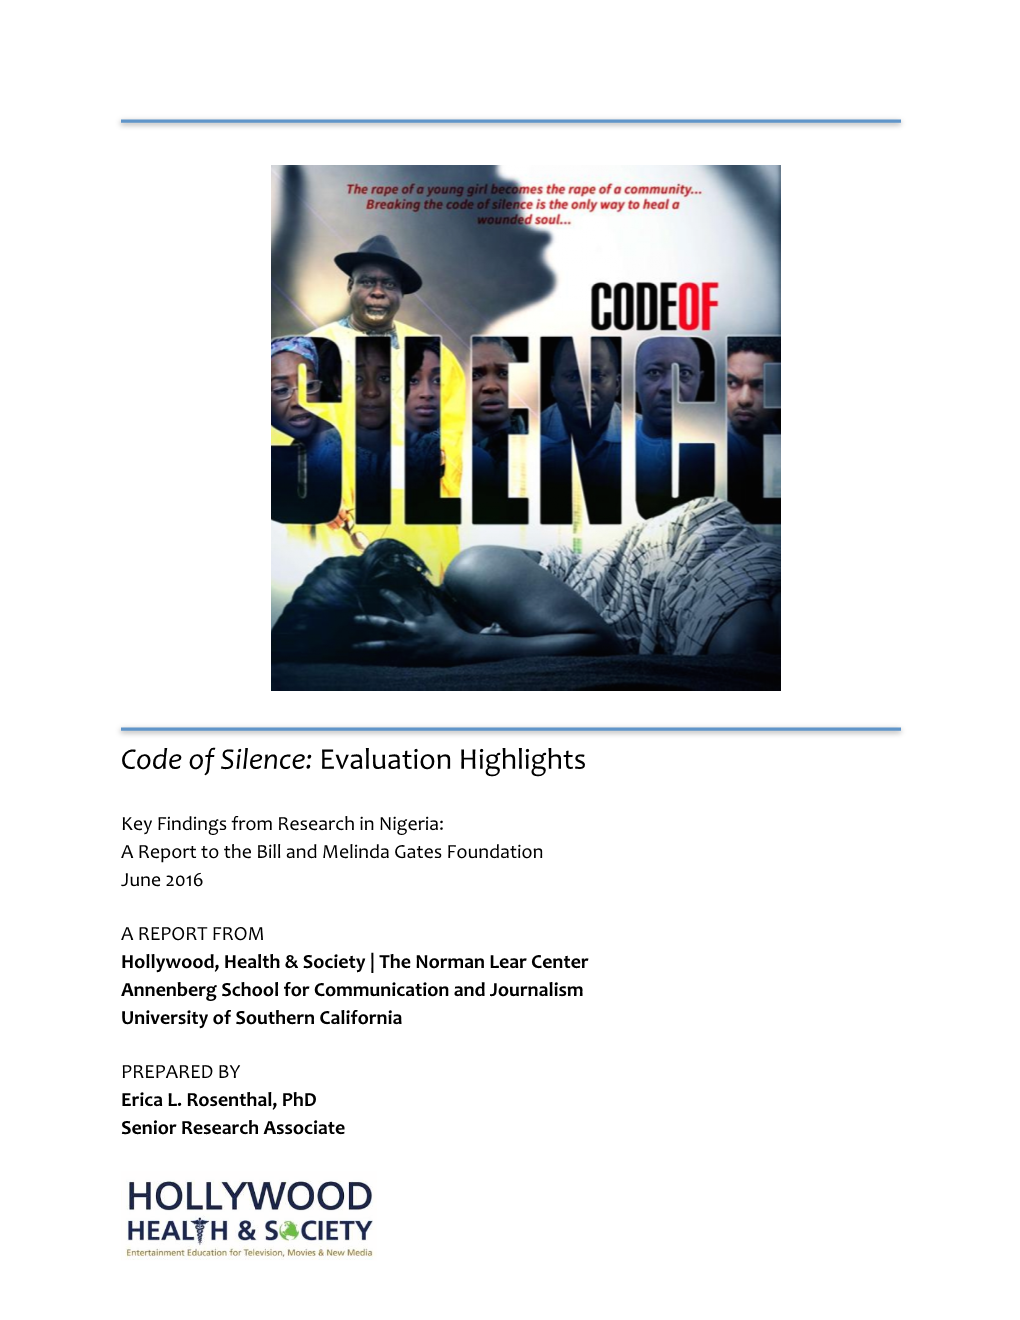 Code of Silence: Evaluation Highlights. Key